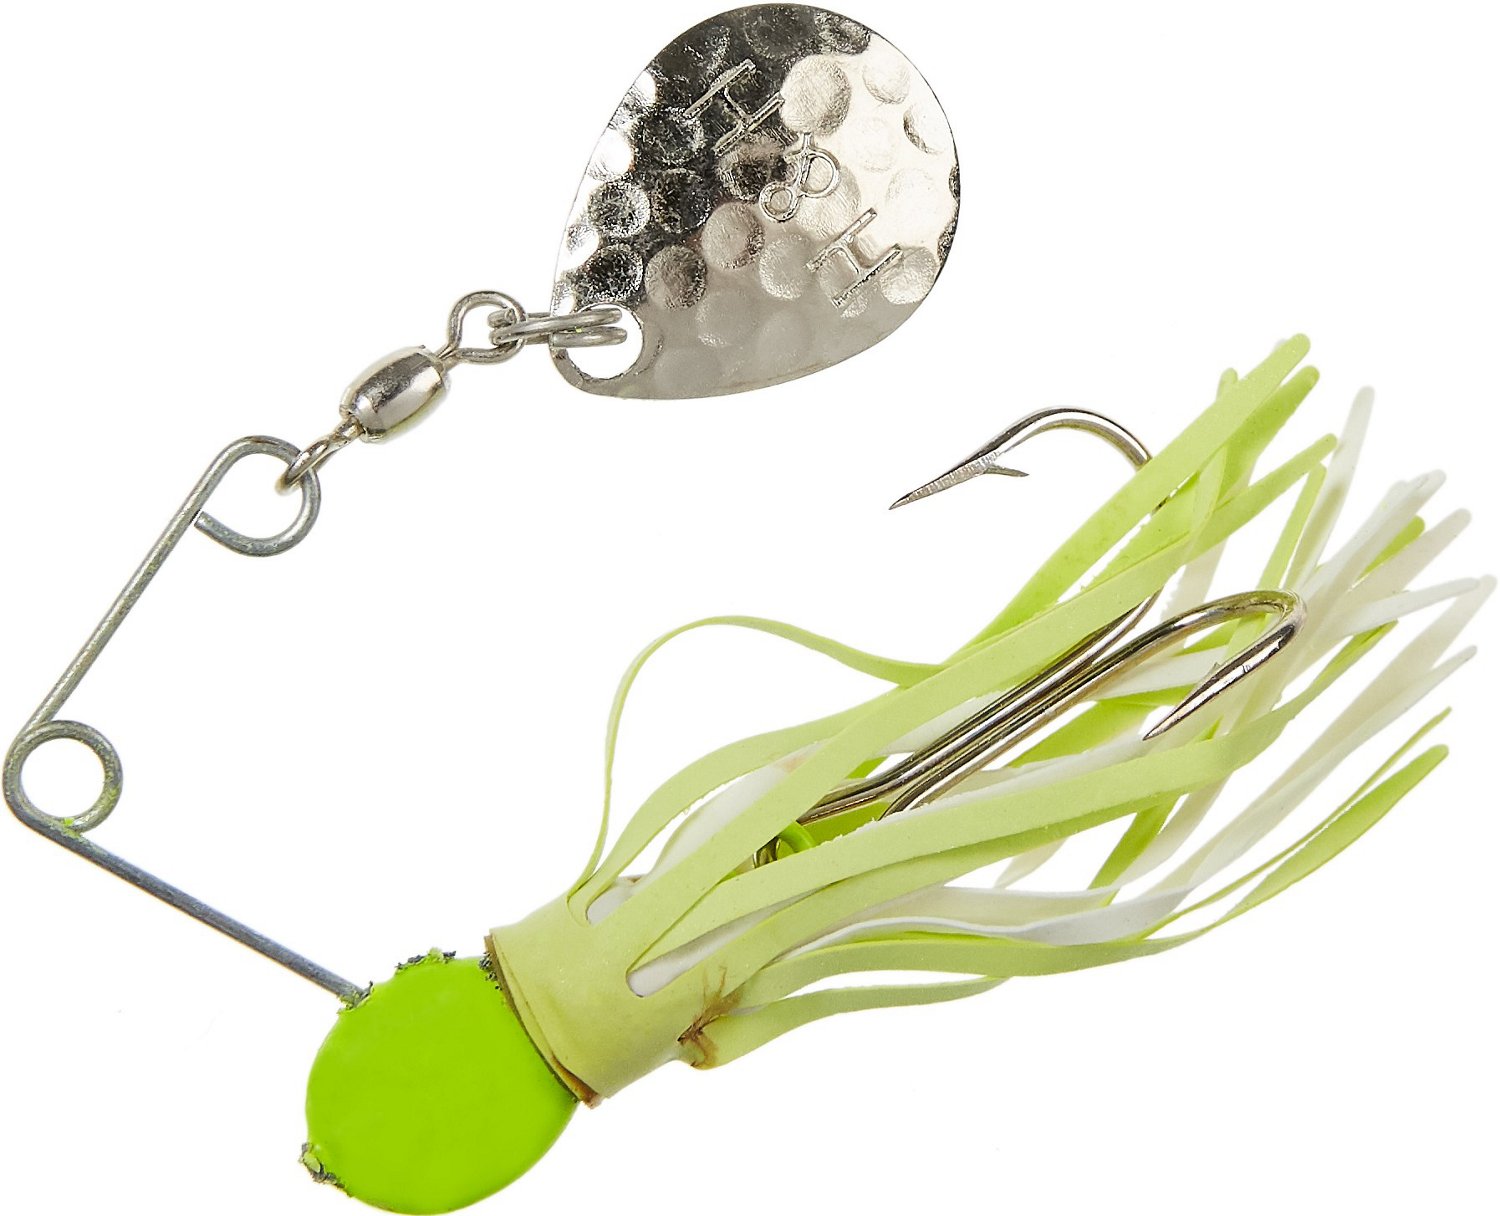 PICK 1 LURE. COLOR COLLECTIBLE GEE-MIN-EE HYBRID INLINE SPINNER FISHING LURE